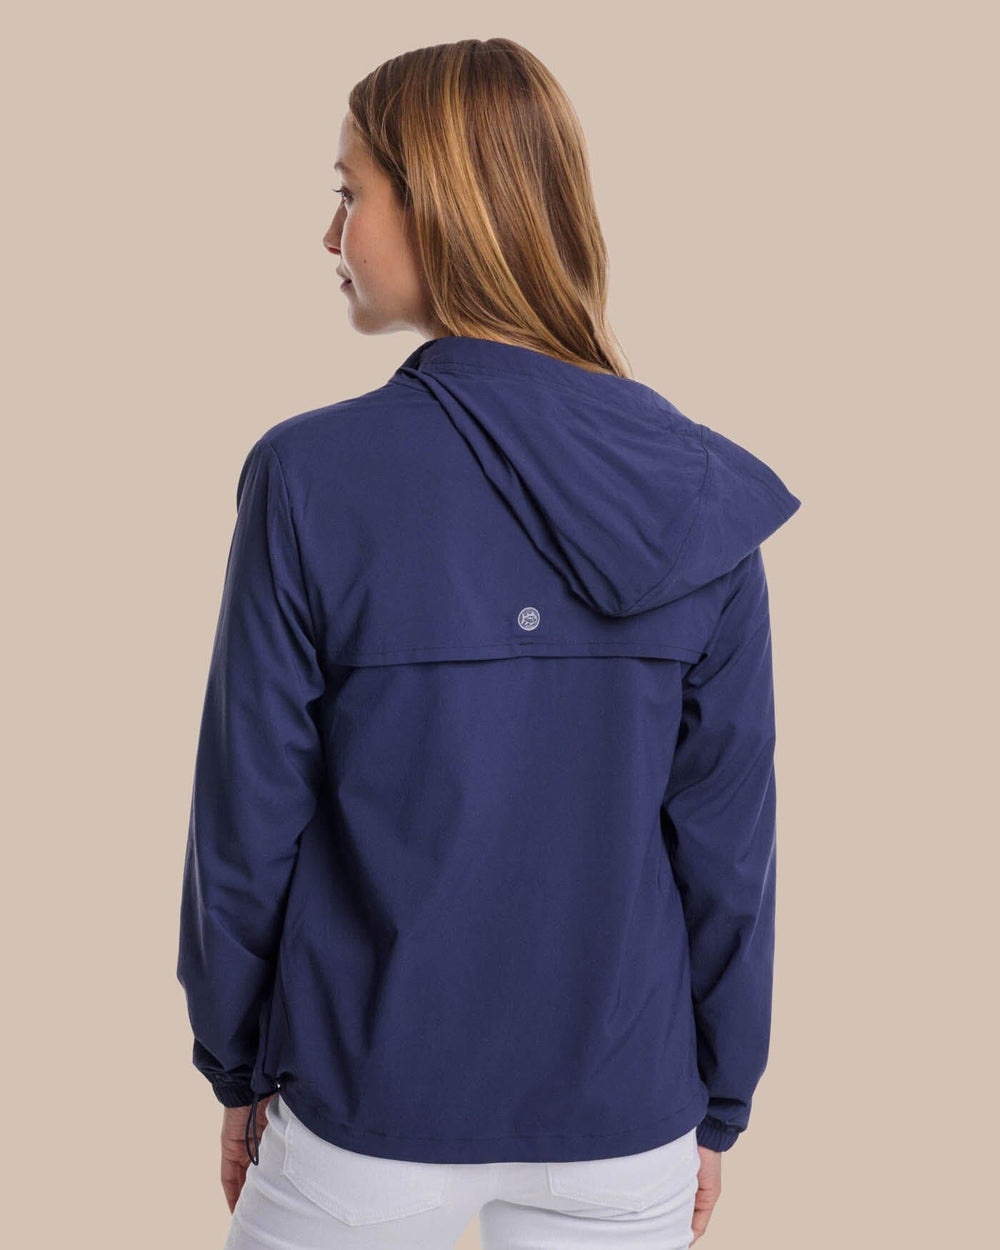 The back view of the Southern Tide Calie Pop Placket Popover by Southern Tide - Dress Blue